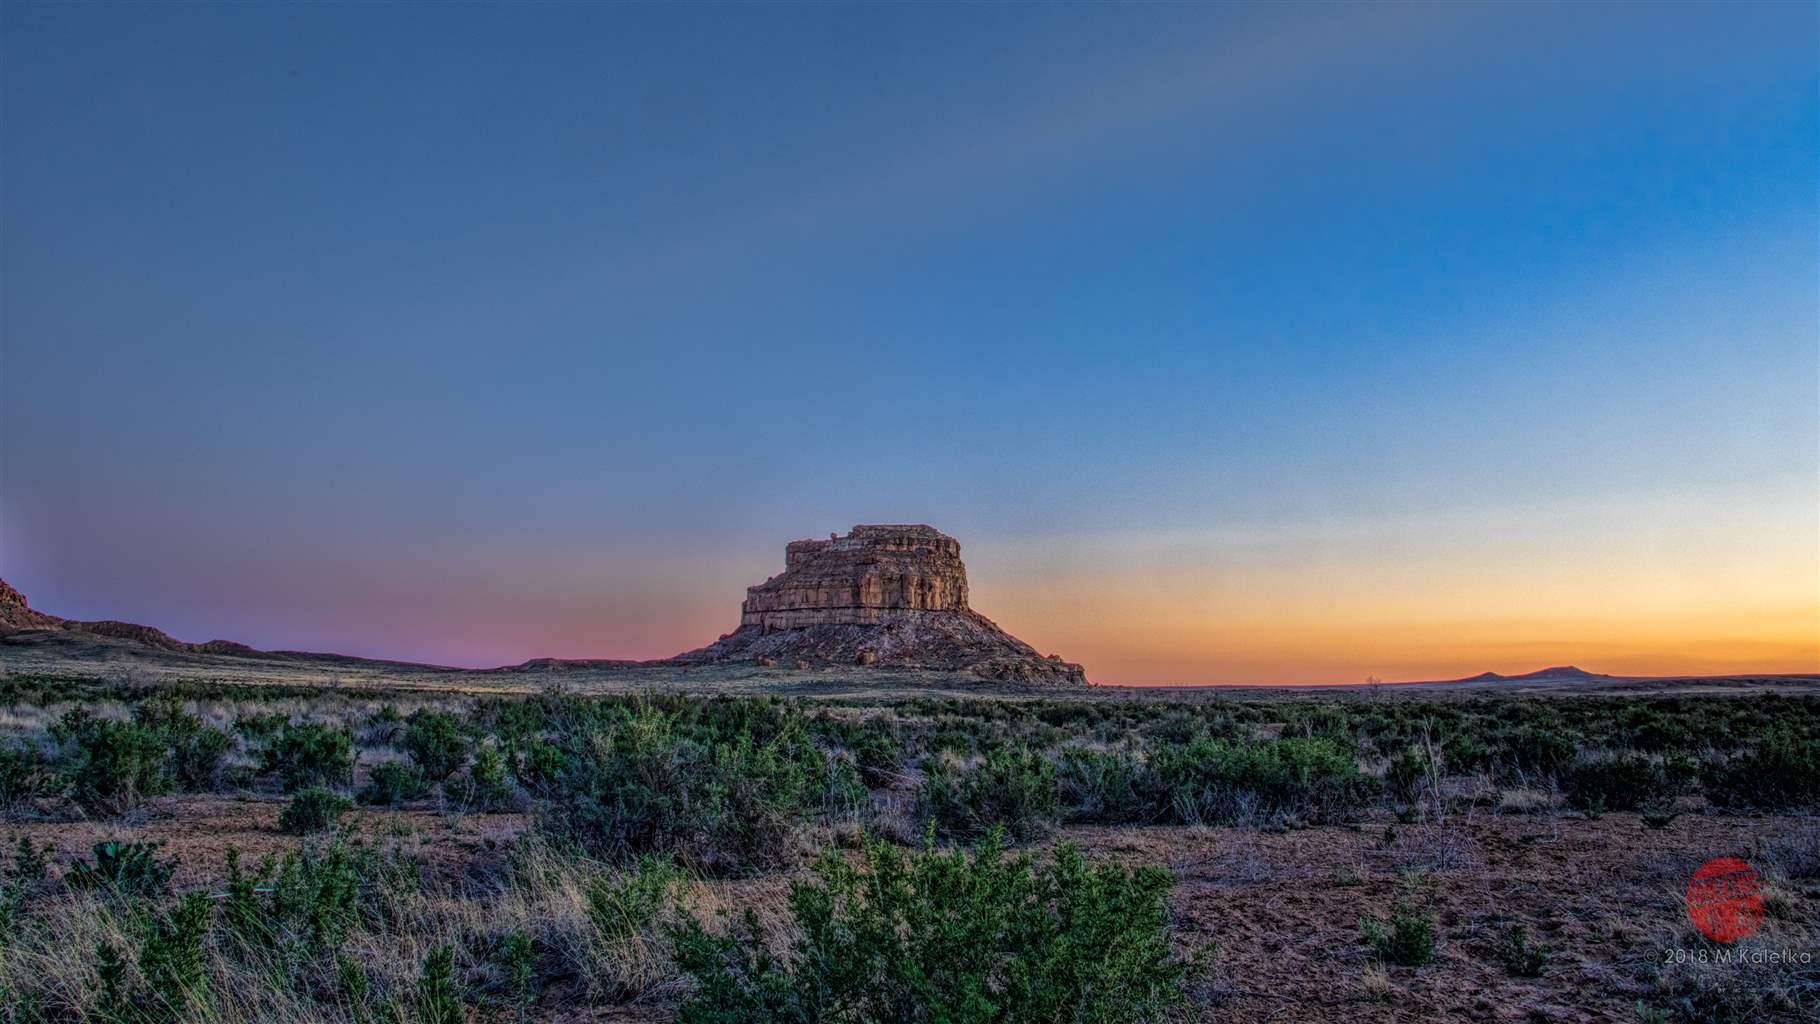 A red-rock butte rises from a desert landscape of low, brittle bushes and sandy dirt. The sky is lit by the colors of a brilliant southwestern sunset.